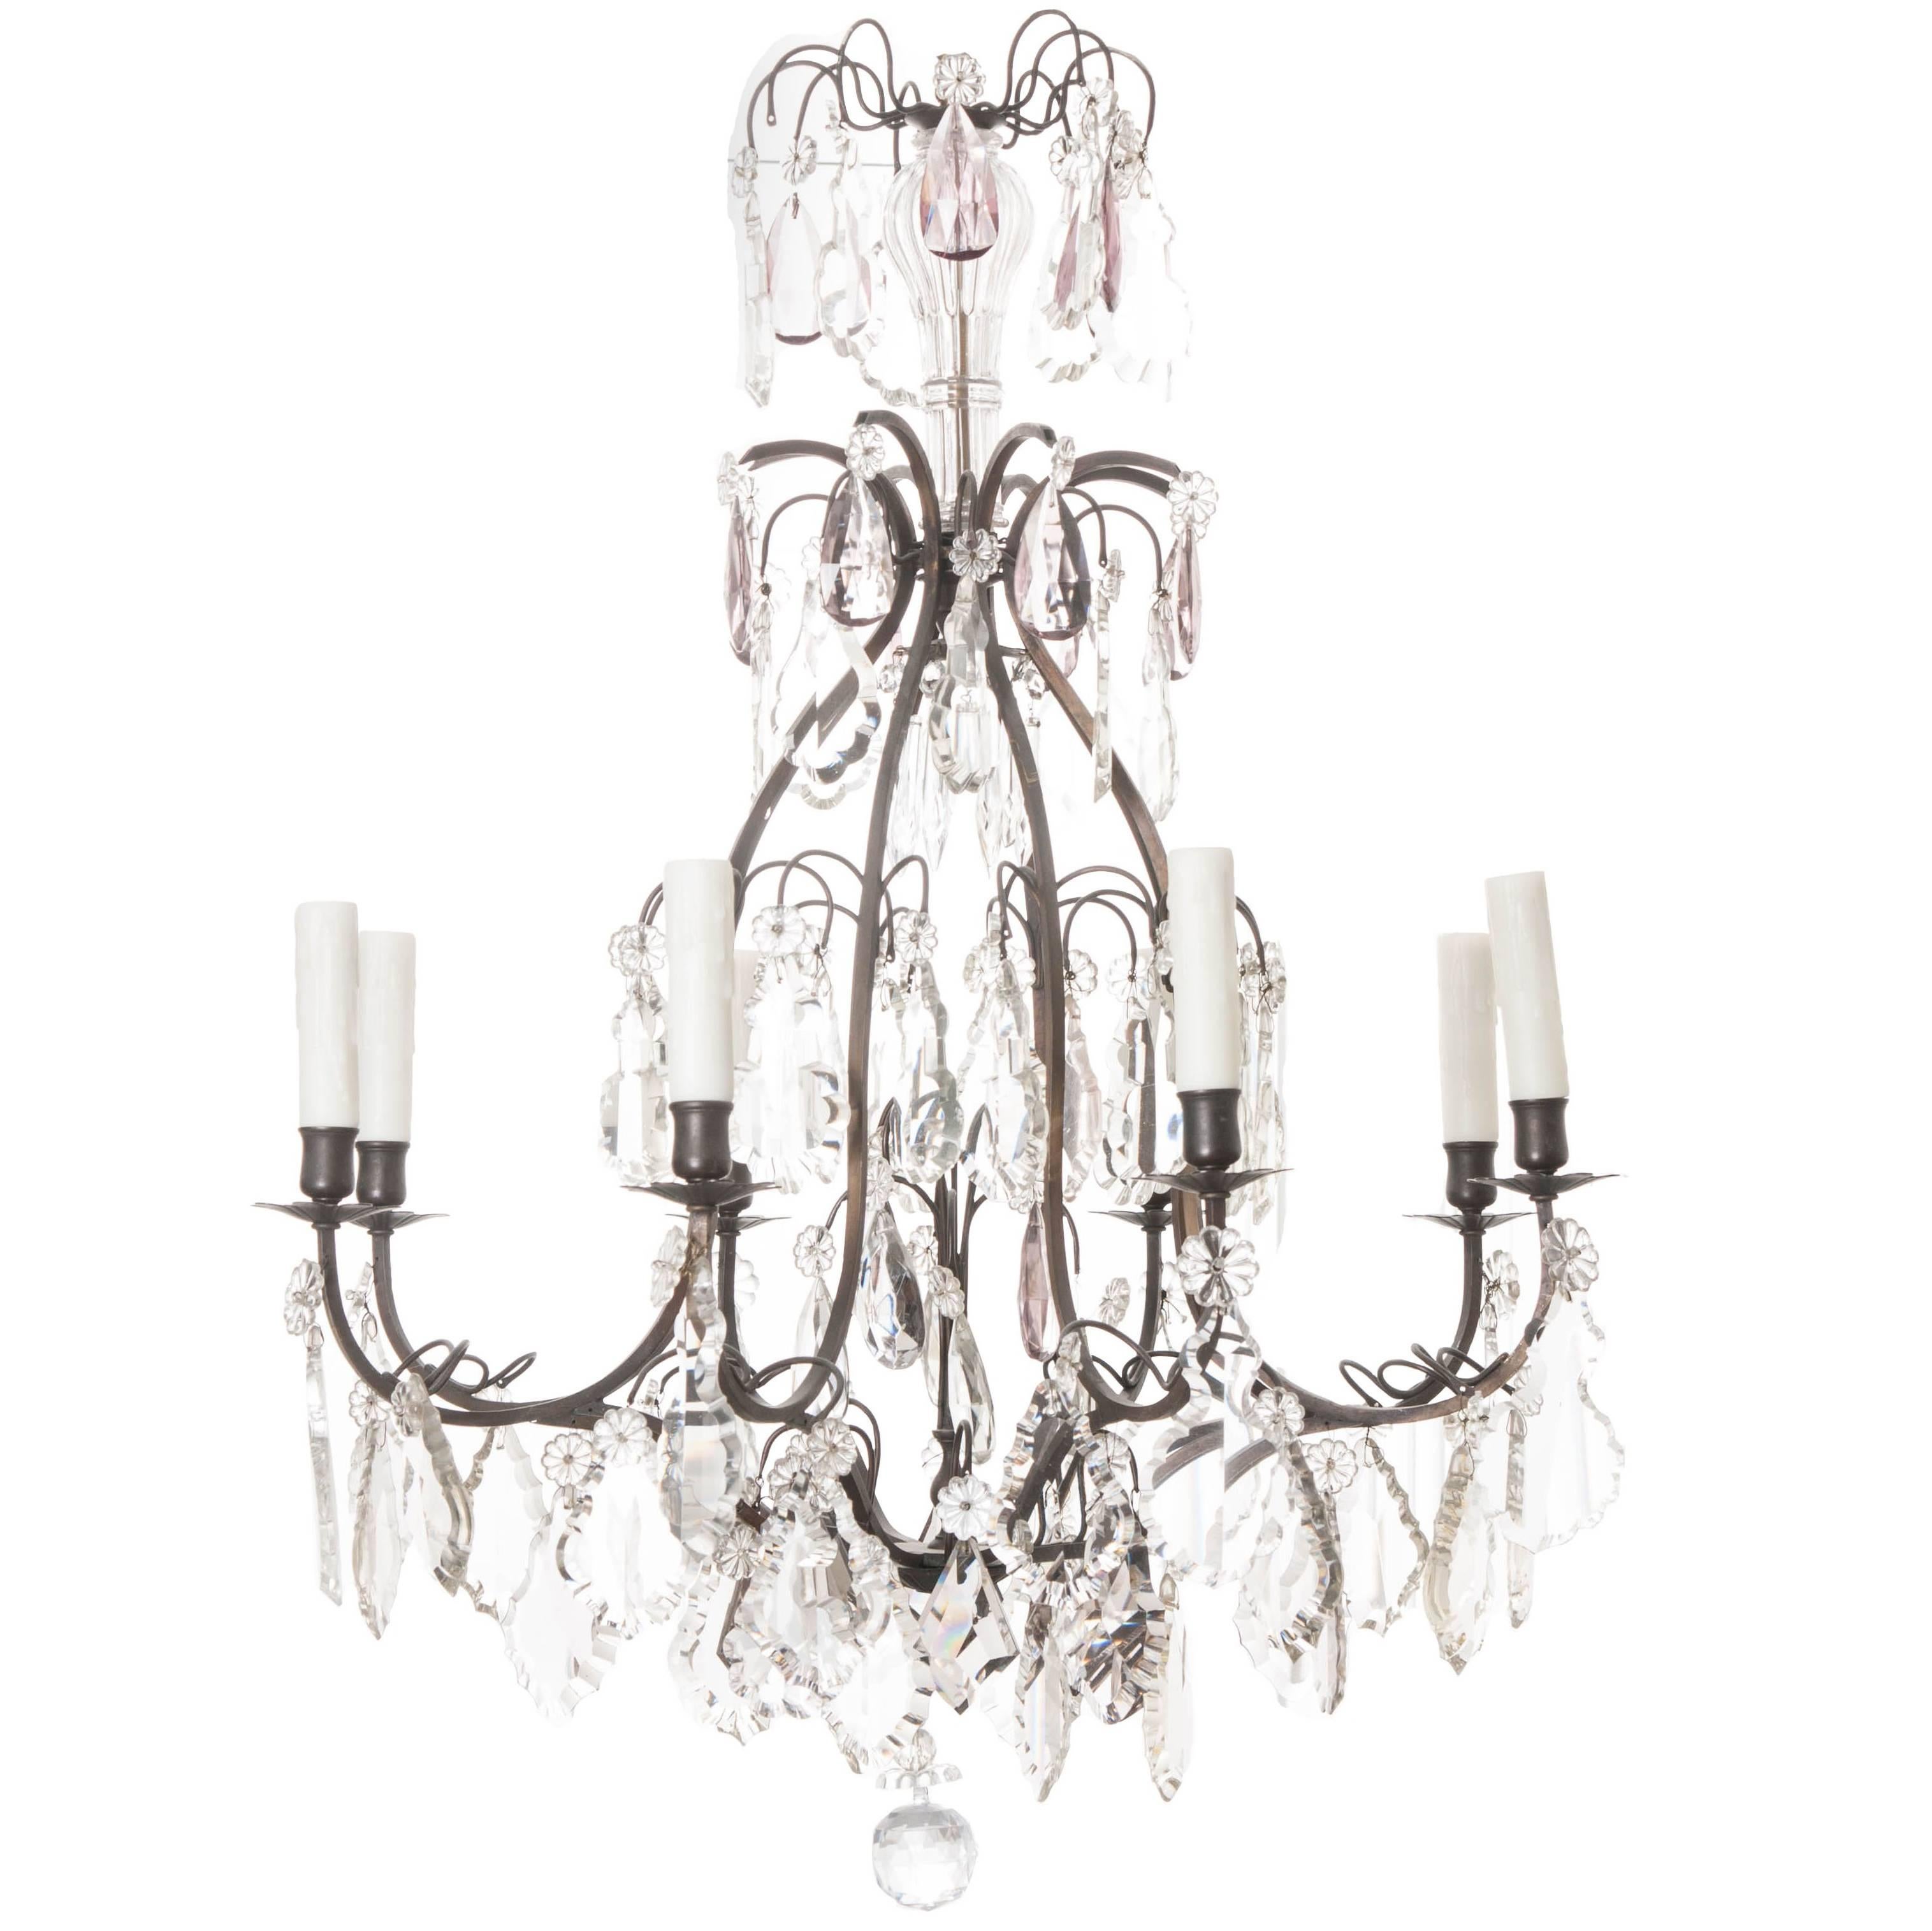 French 19th Century Eight-Light Chandelier with Amethyst Crystals